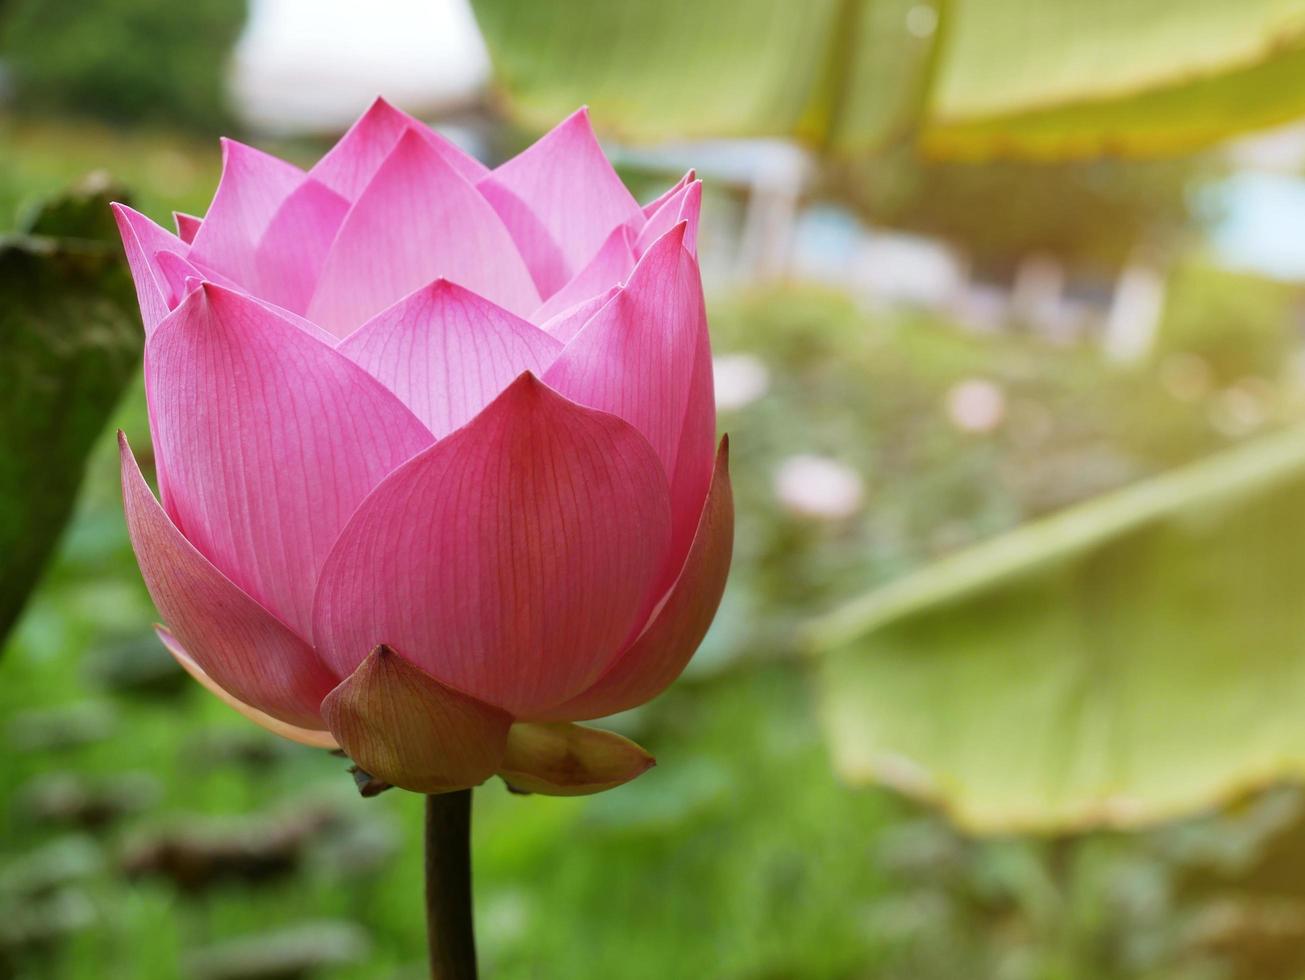 The pink lotus was blooming with a fair amount of sunlight. photo